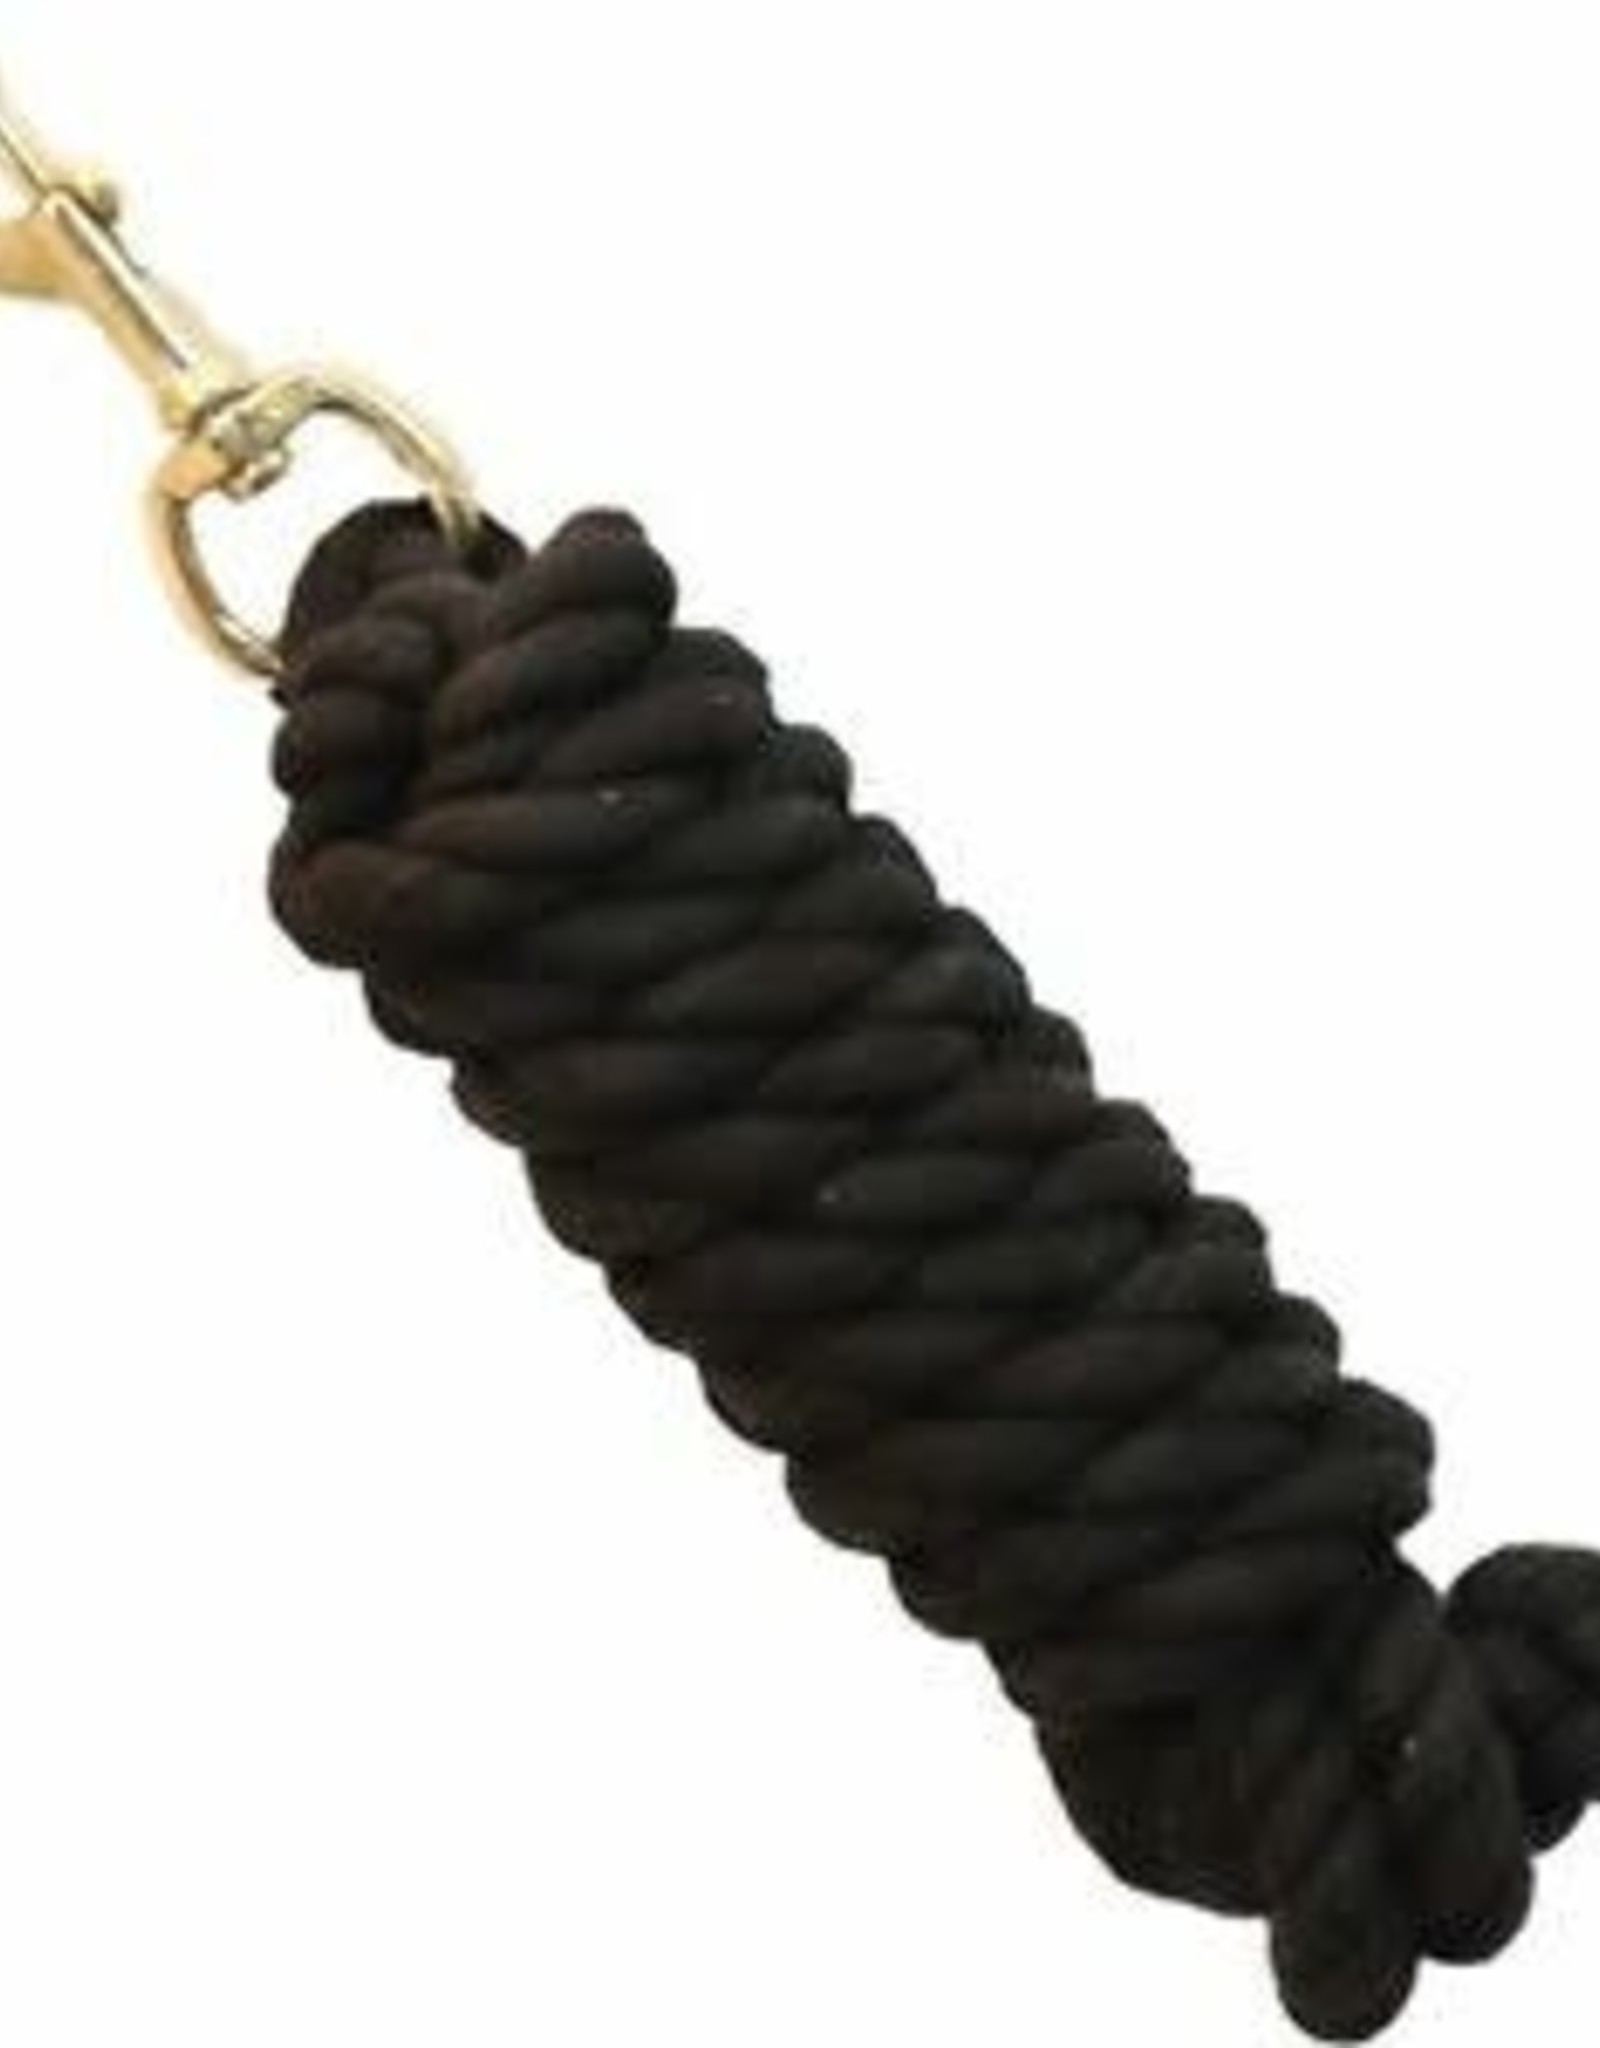 Solid Color Cotton Lead Rope with Snap